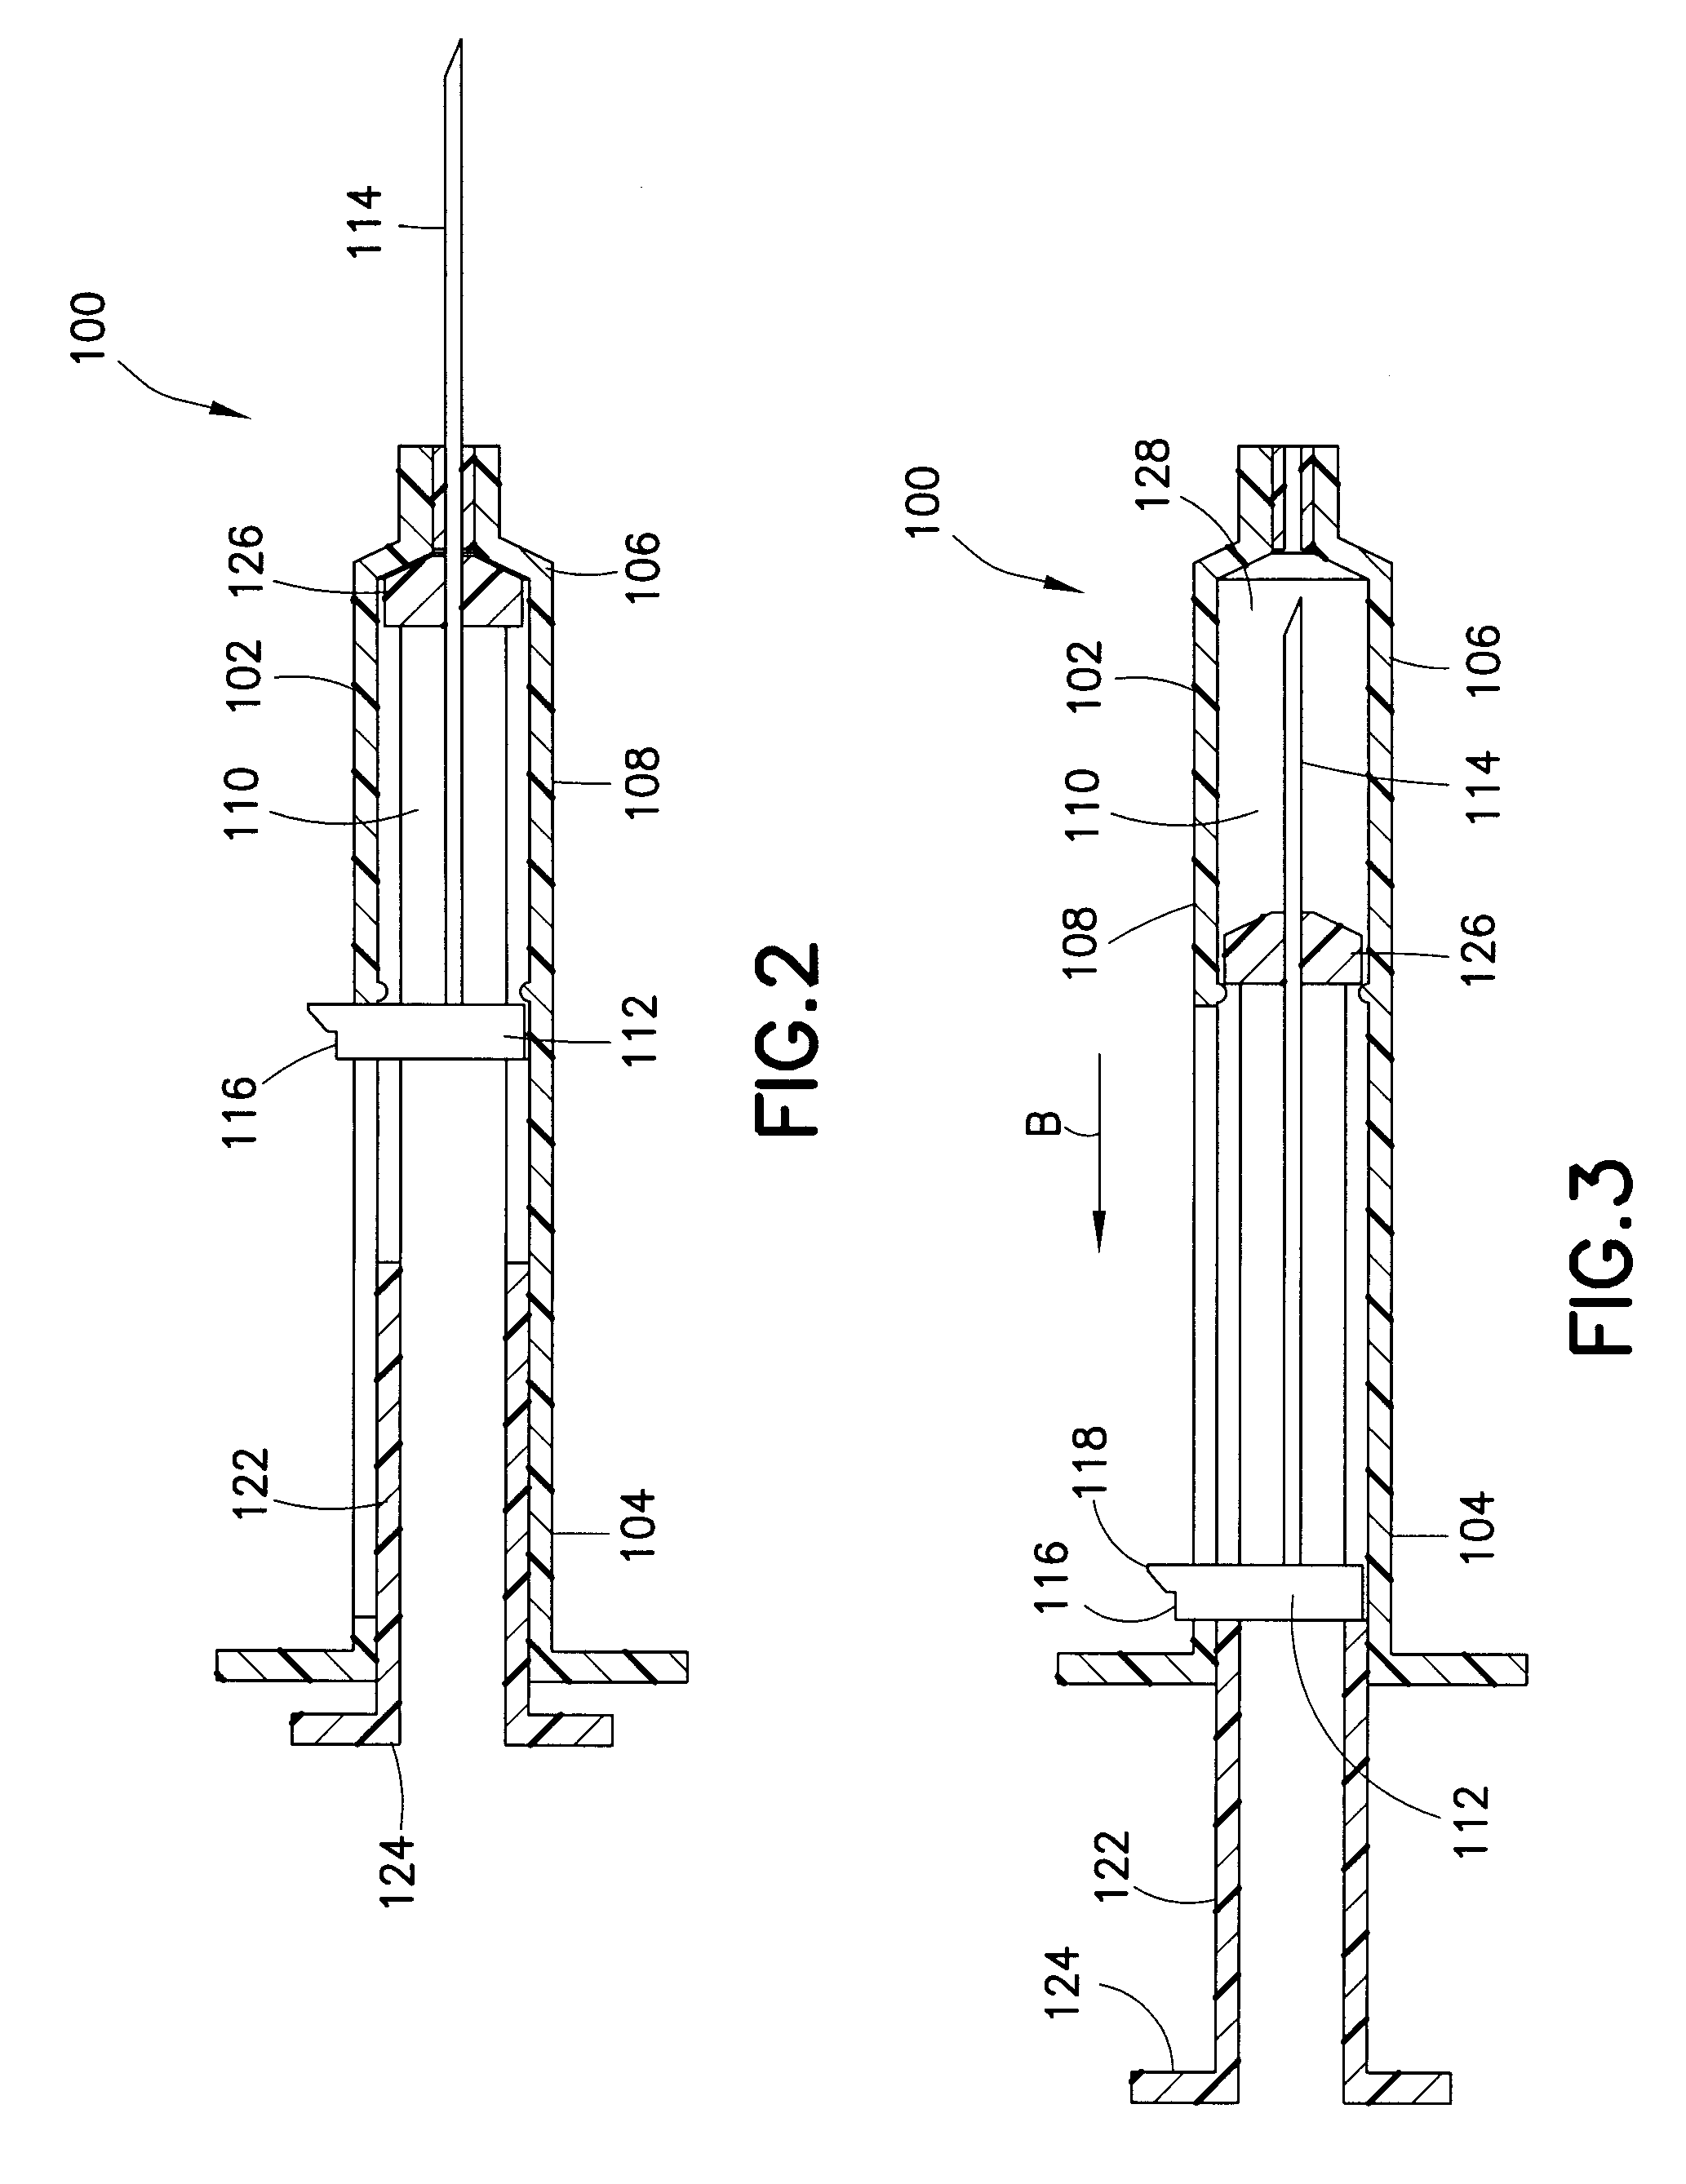 Safety Syringe Having A Manually Activated Retractable Needle